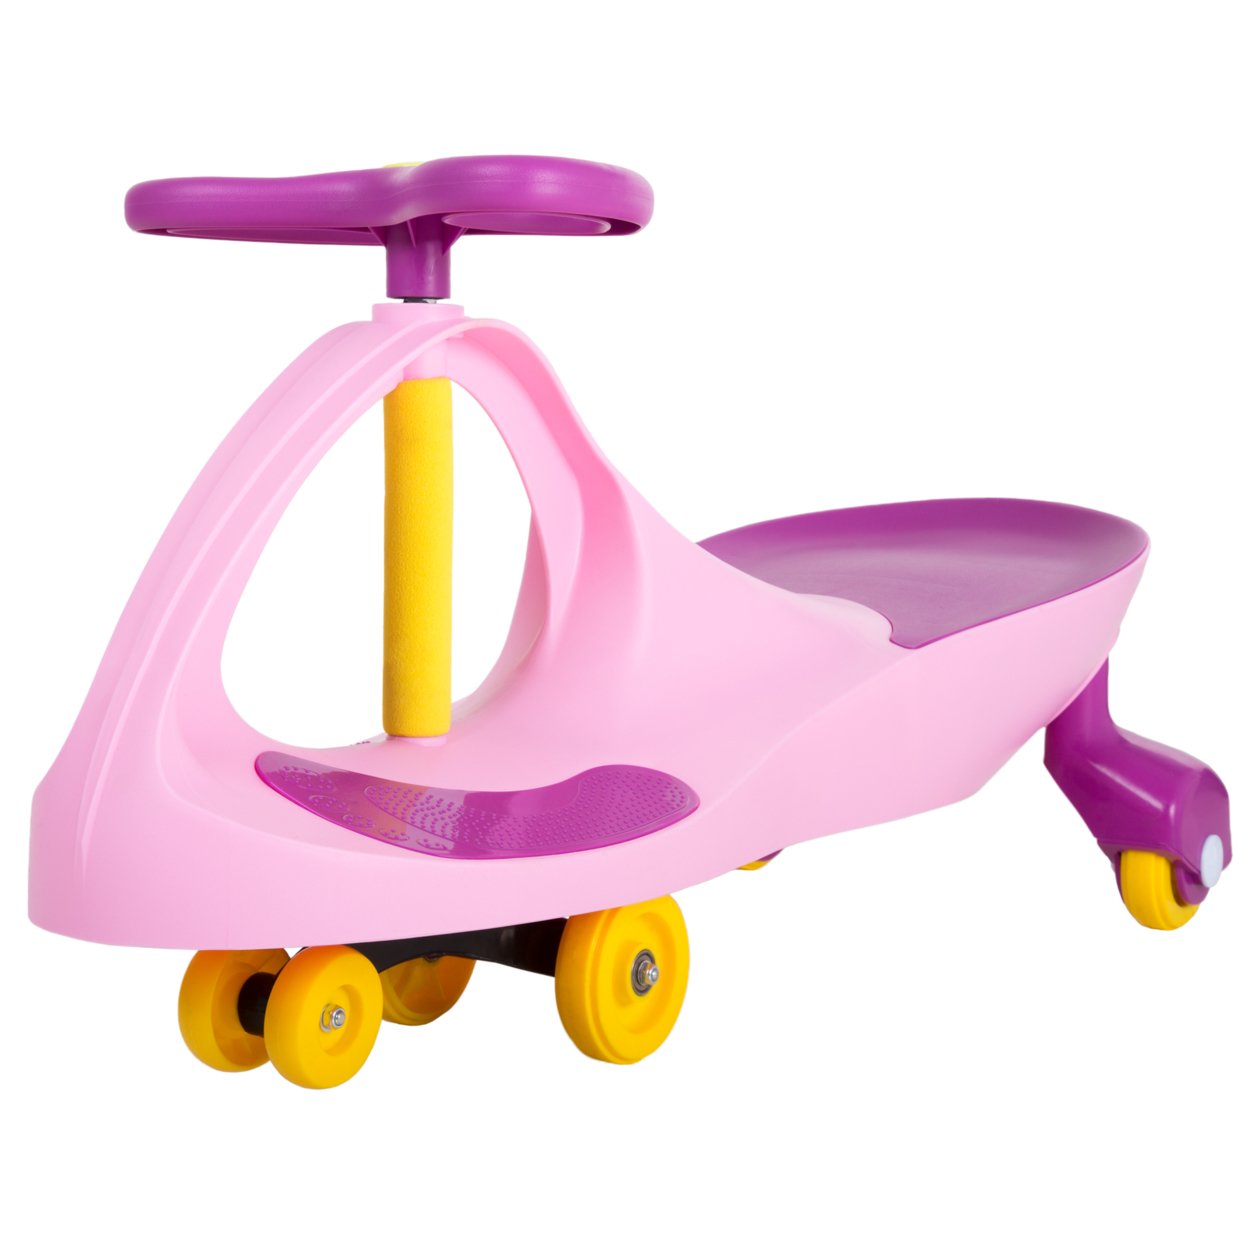 Lil' Rider Pink Purple Wiggle Ride-on Car Roller Coaster Car Energy Powered Ride On Toy